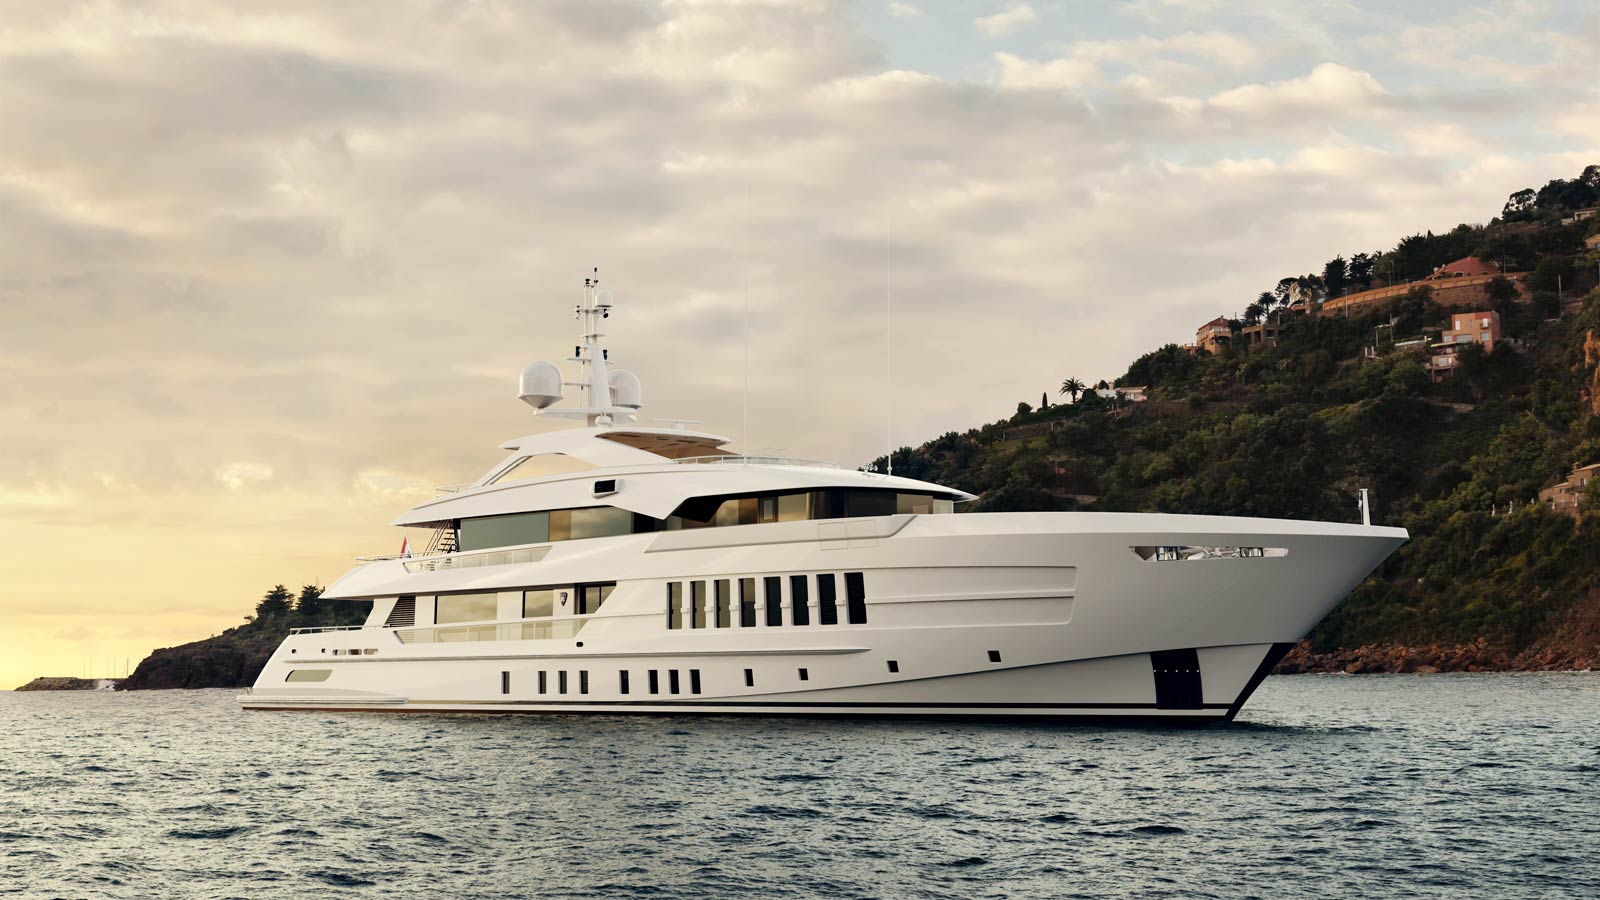 55 meter yacht for sale